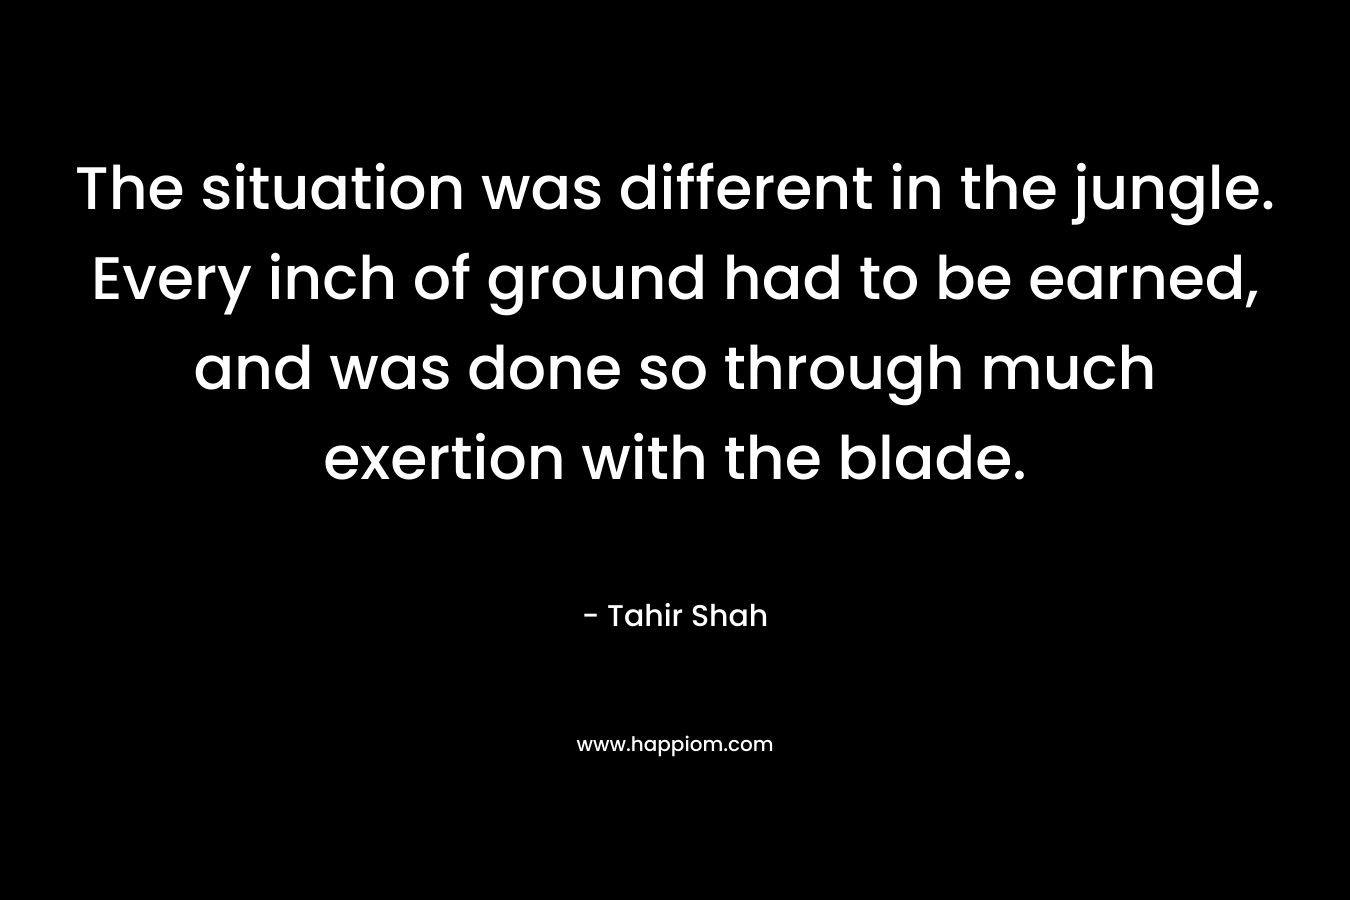 The situation was different in the jungle. Every inch of ground had to be earned, and was done so through much exertion with the blade. – Tahir Shah